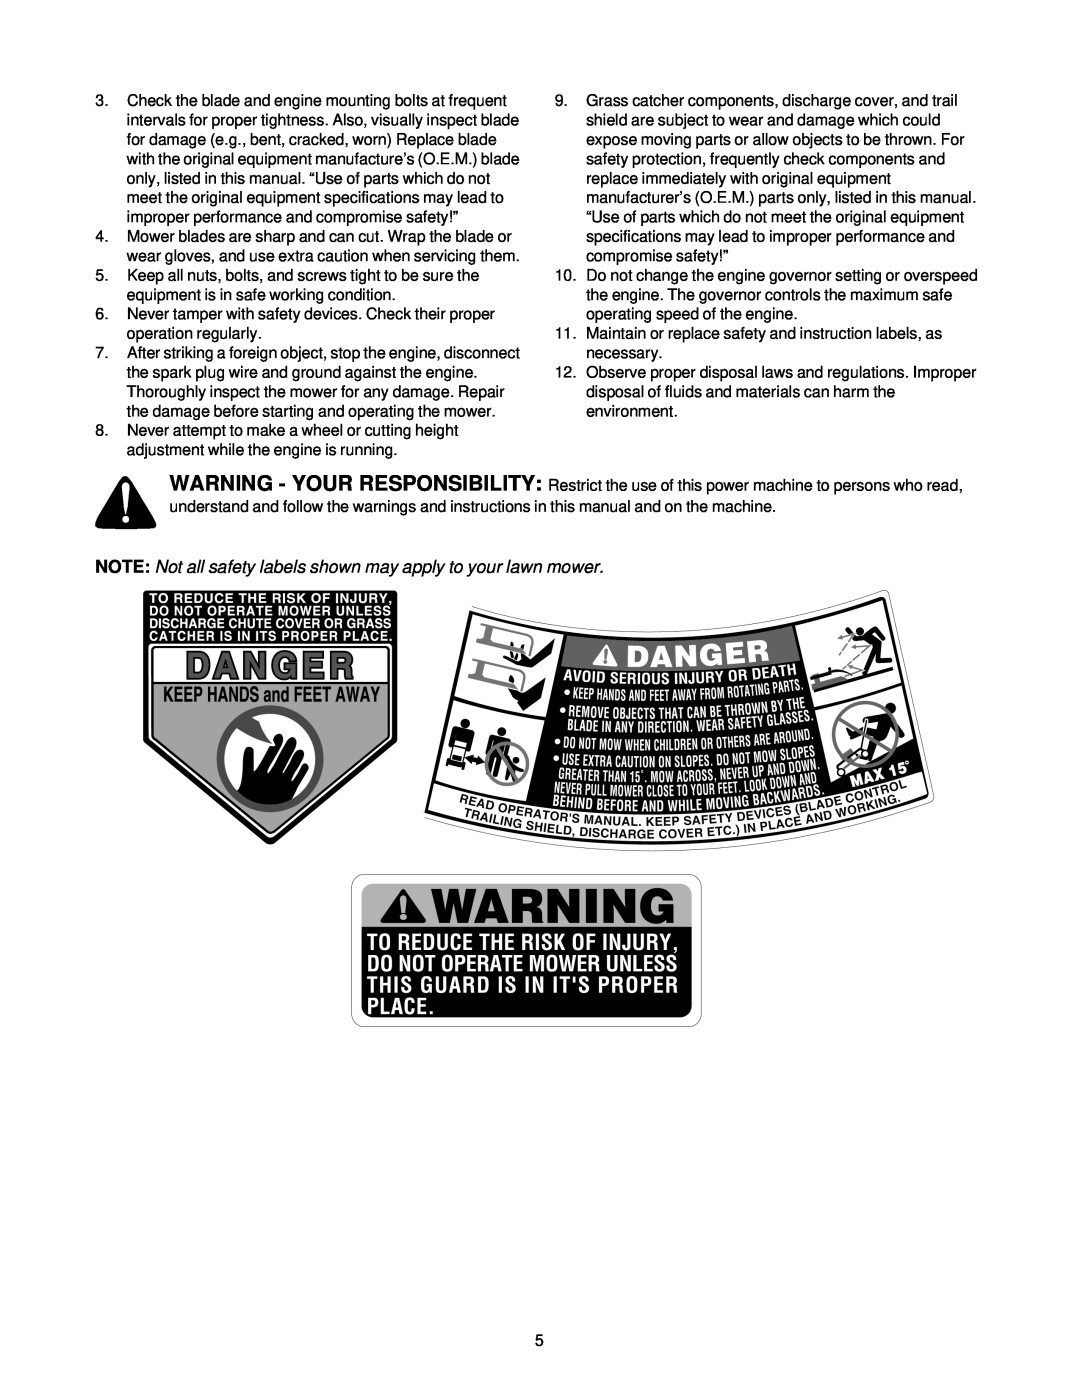 MTD 260 Thru 279 manual NOTE Not all safety labels shown may apply to your lawn mower 